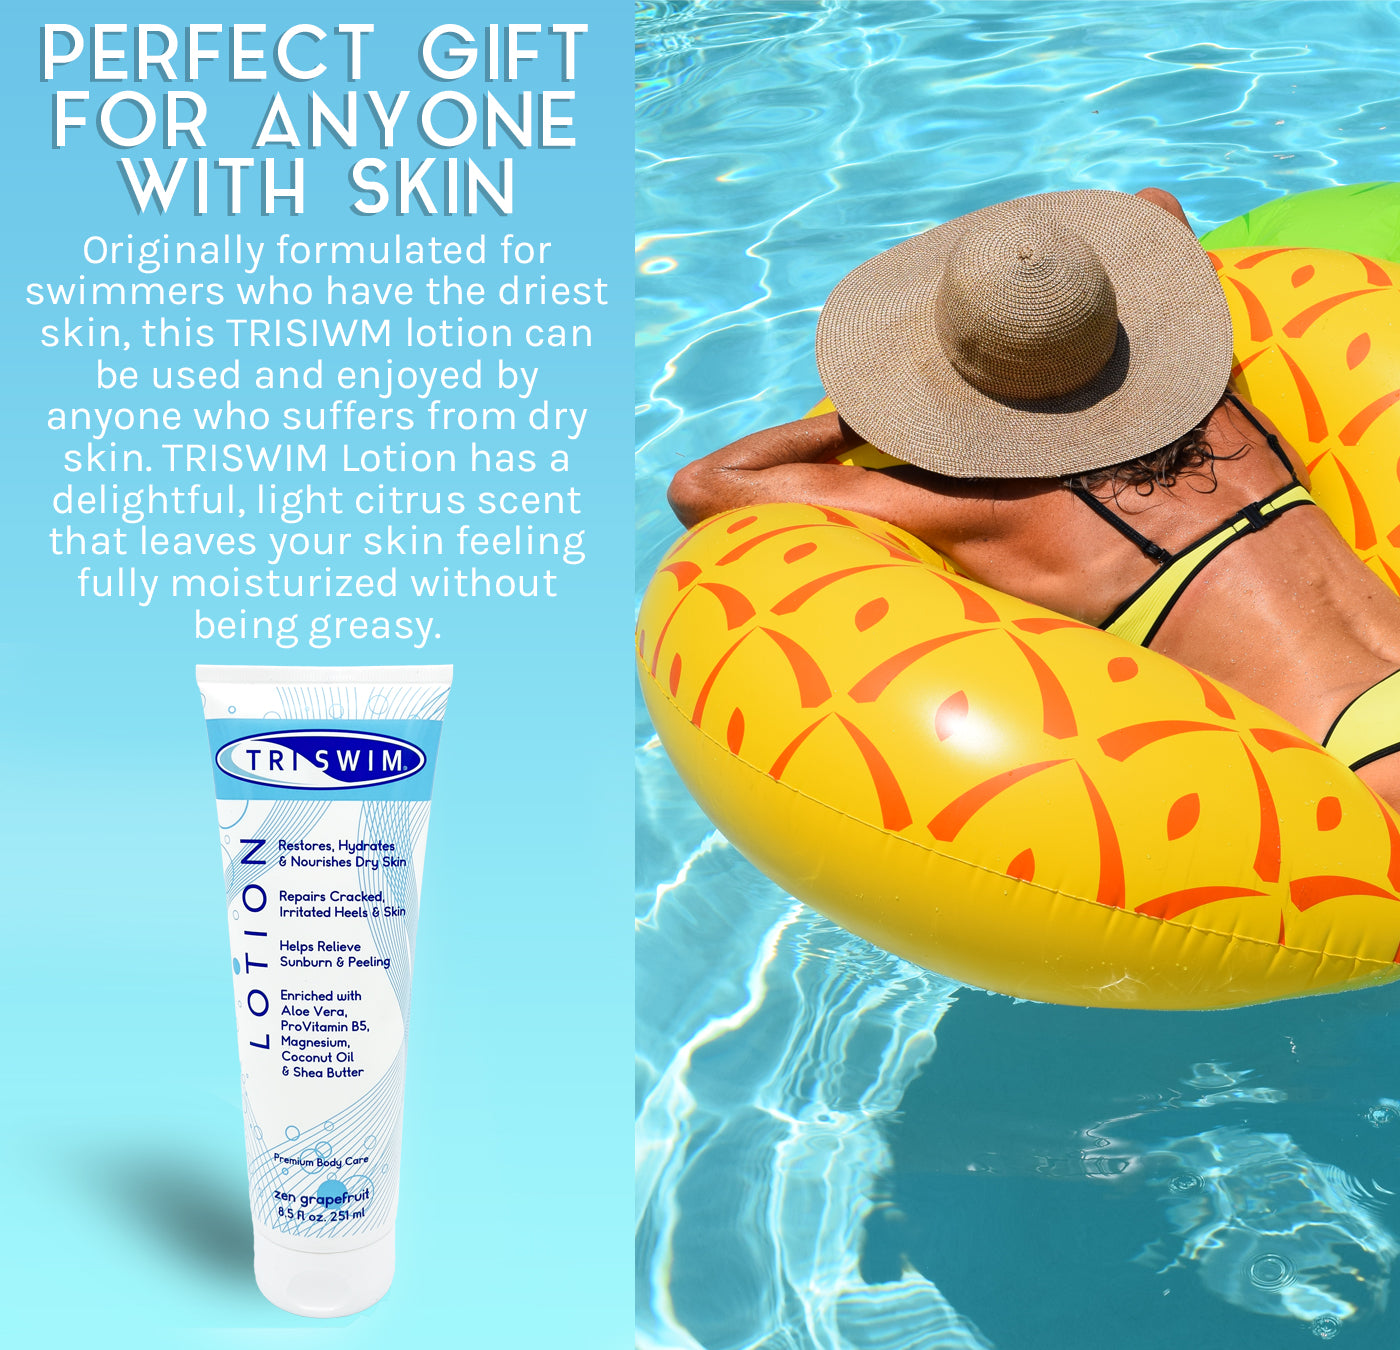 TRISWIM Lotion is non greasy and the perfect gift